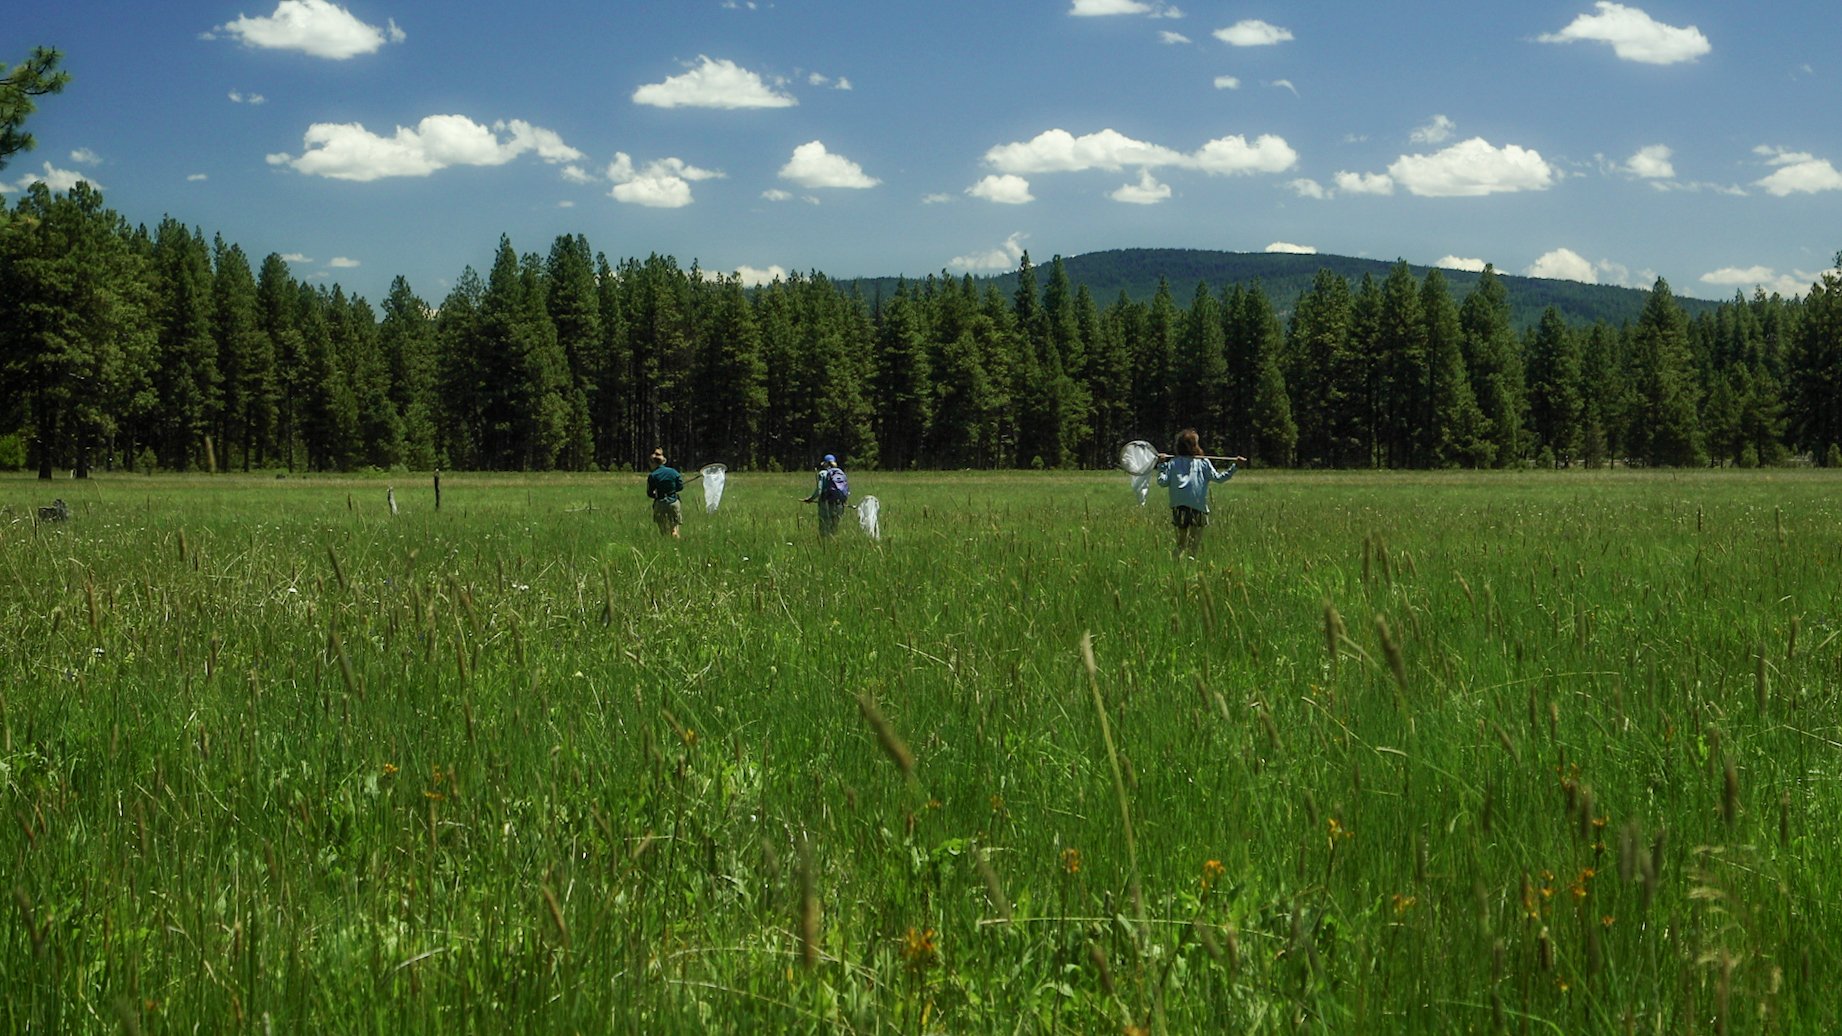 A picture-perfect day in the meadow